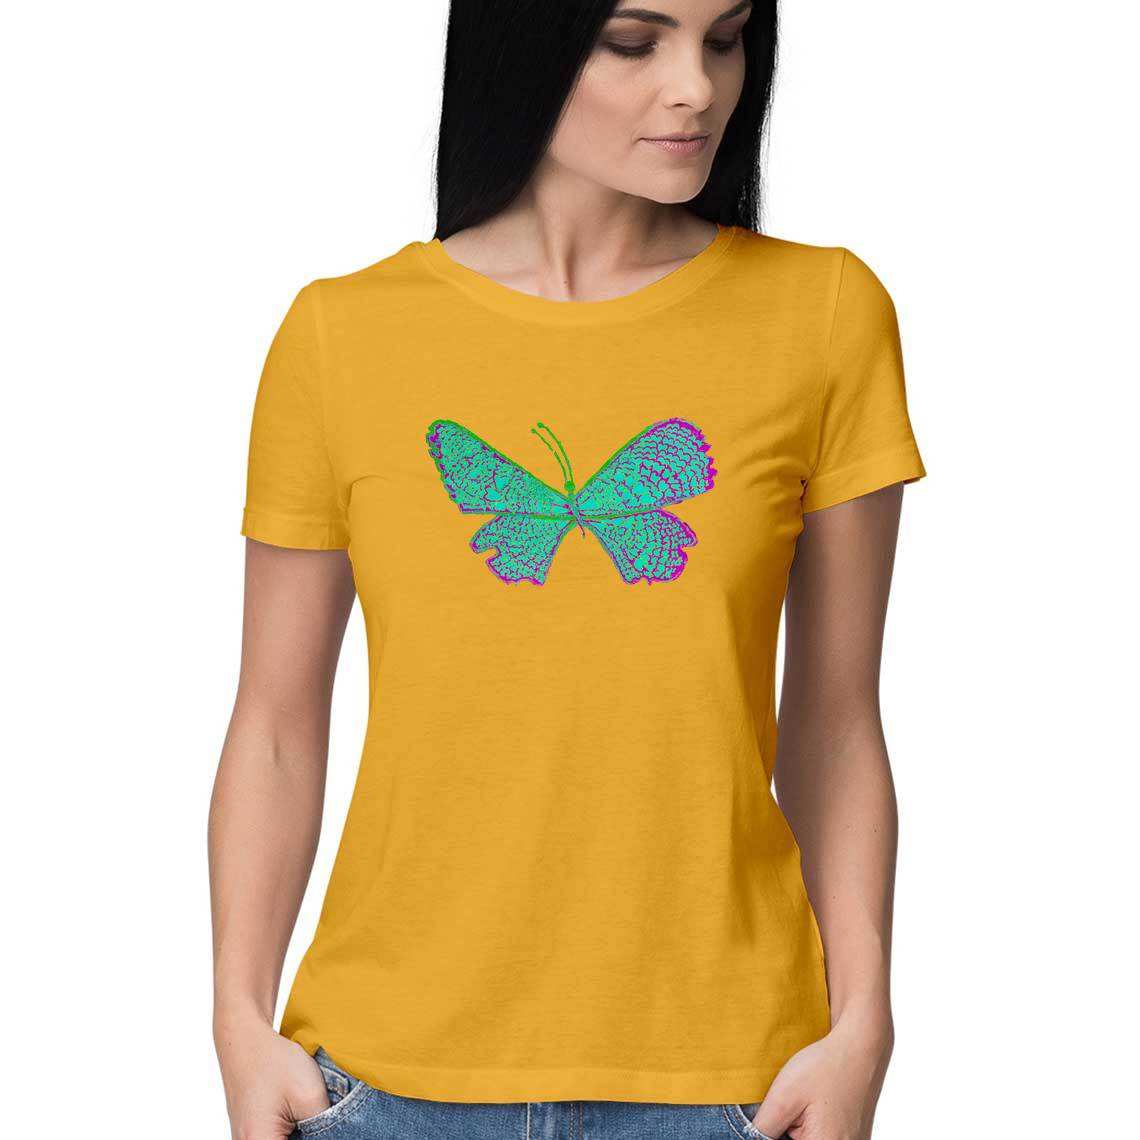 The Turquoise Butterfly Women's T-Shirt - CBD Store India